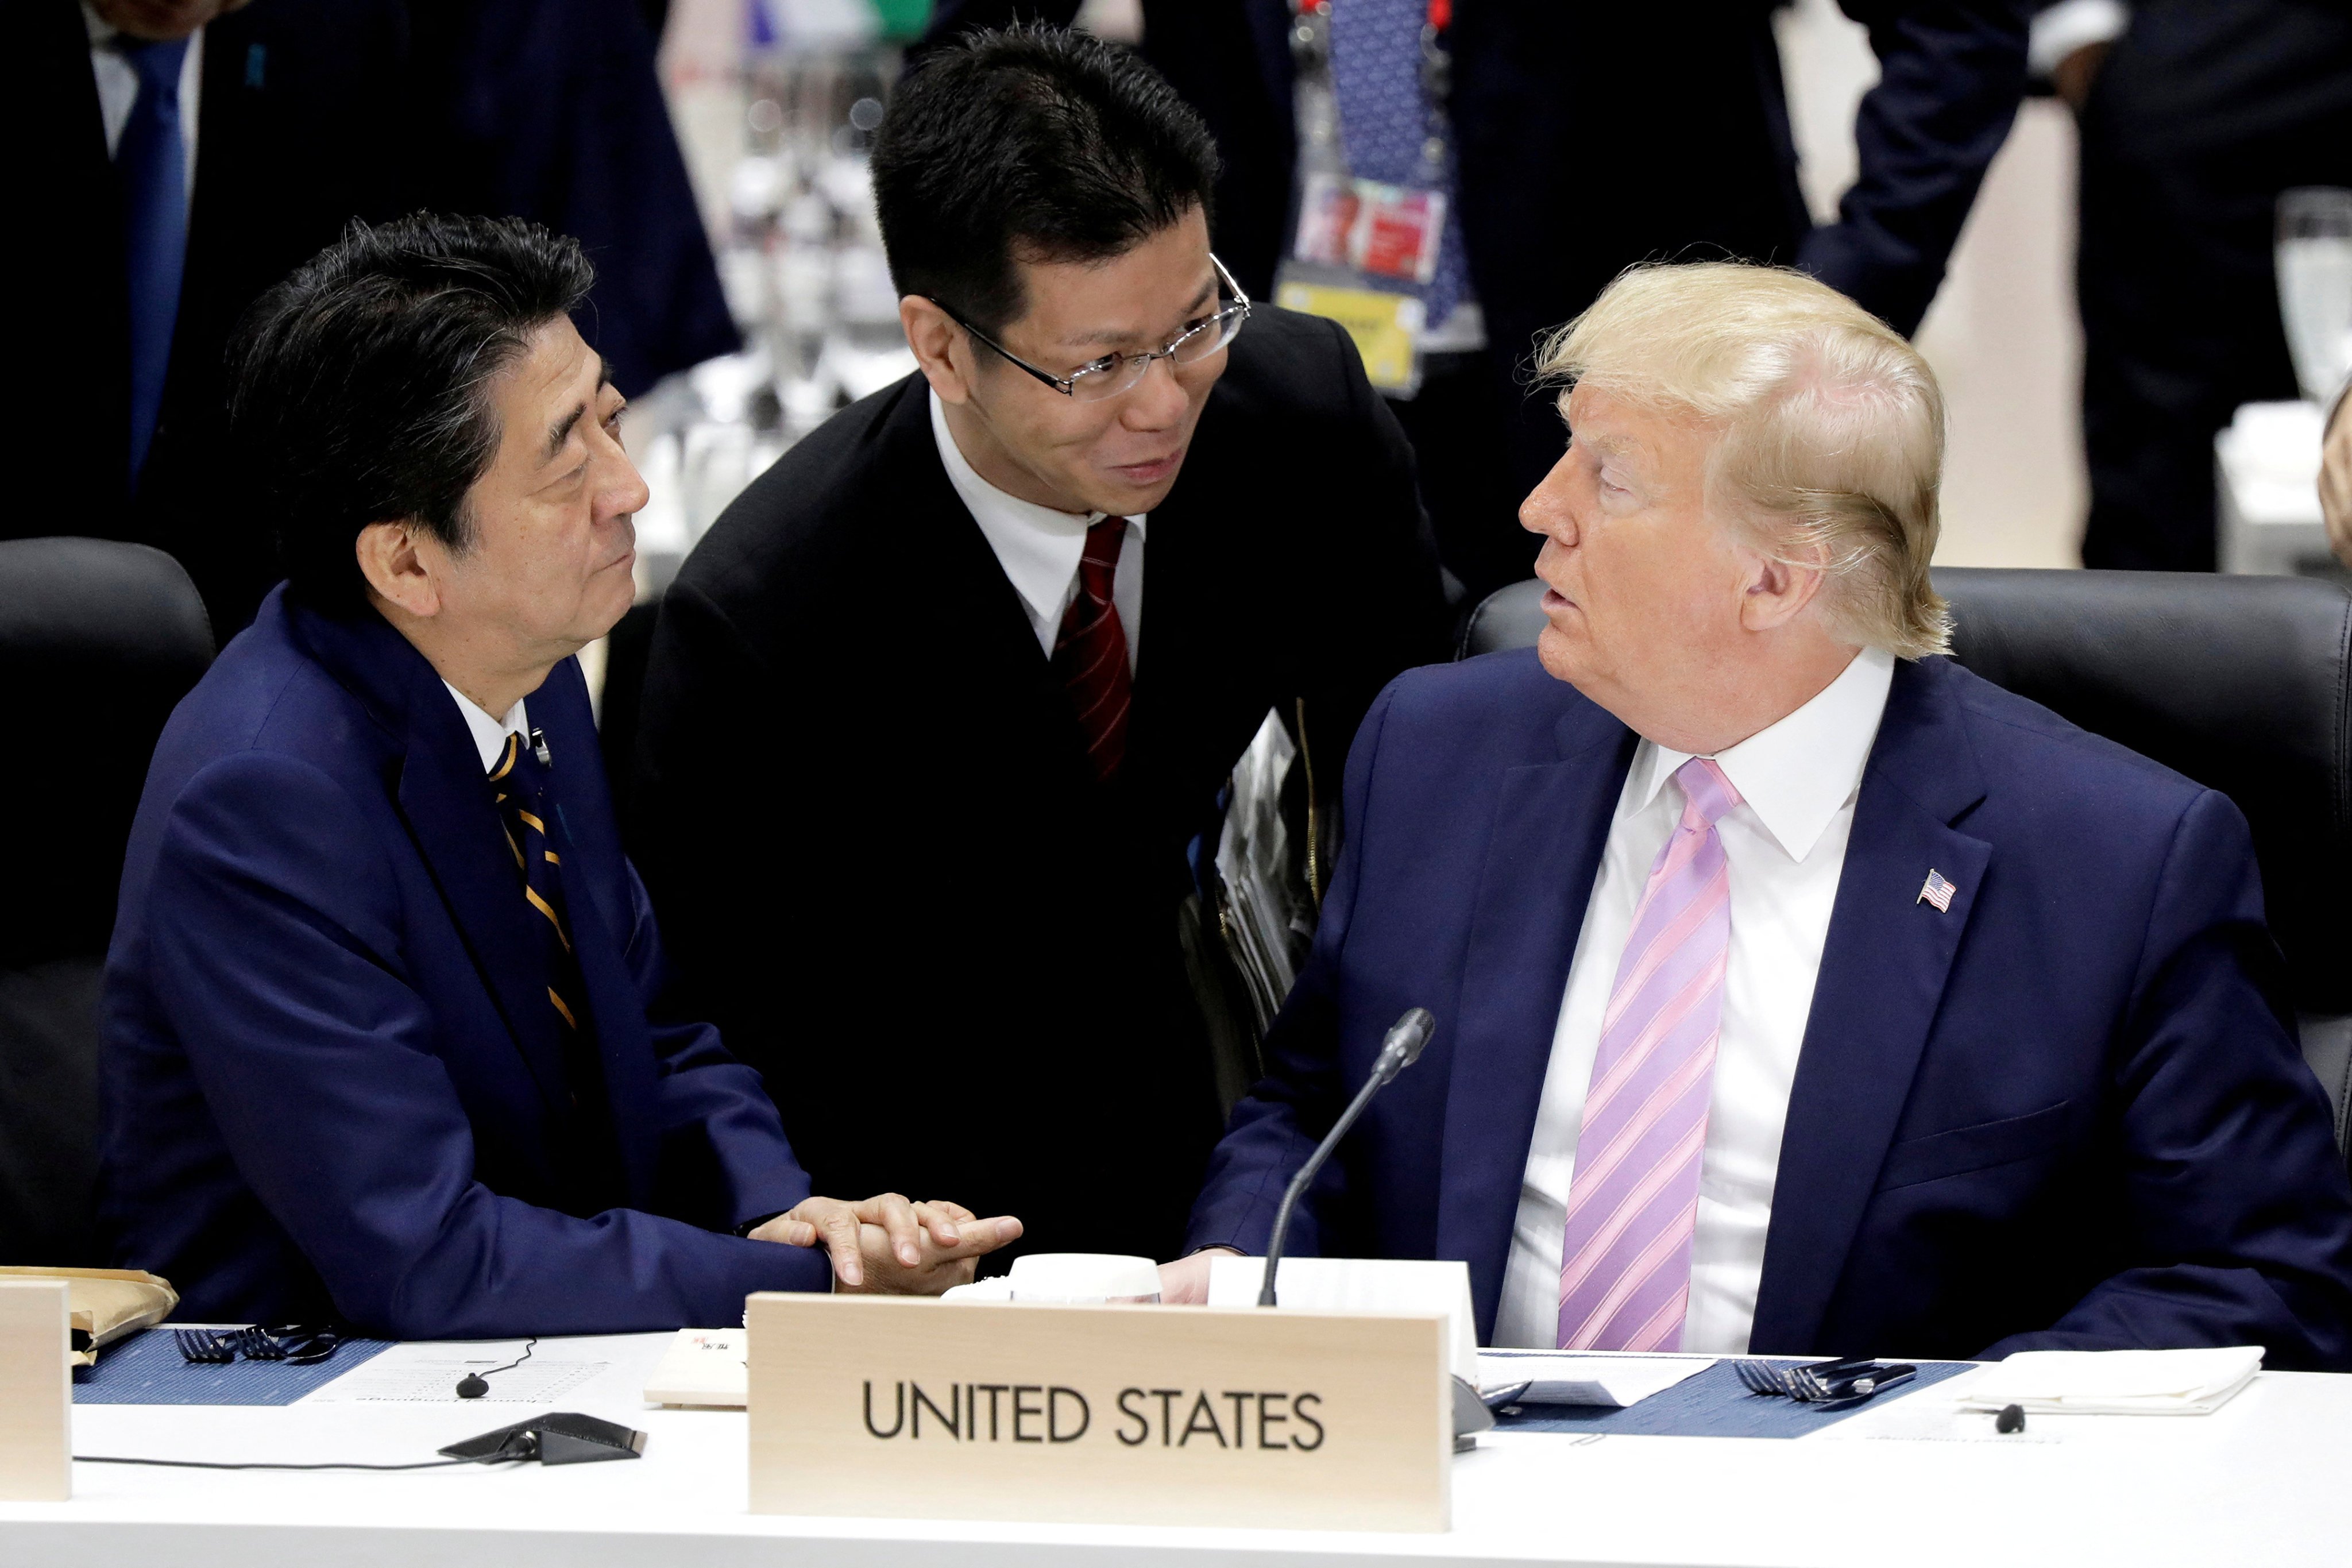 Sunao Takao (centre) helps with translation as then Japanese prime minister Shinzo Abe (left) and US president Donald Trump talk prior to a working lunch at the Group of 20 summit in Osaka, Japan, on June 28, 2019. The Japanese government has turned to Takao and others seen as having insight into Trump as it prepares for the possibility of his returning to the White House. Photo: Reuters